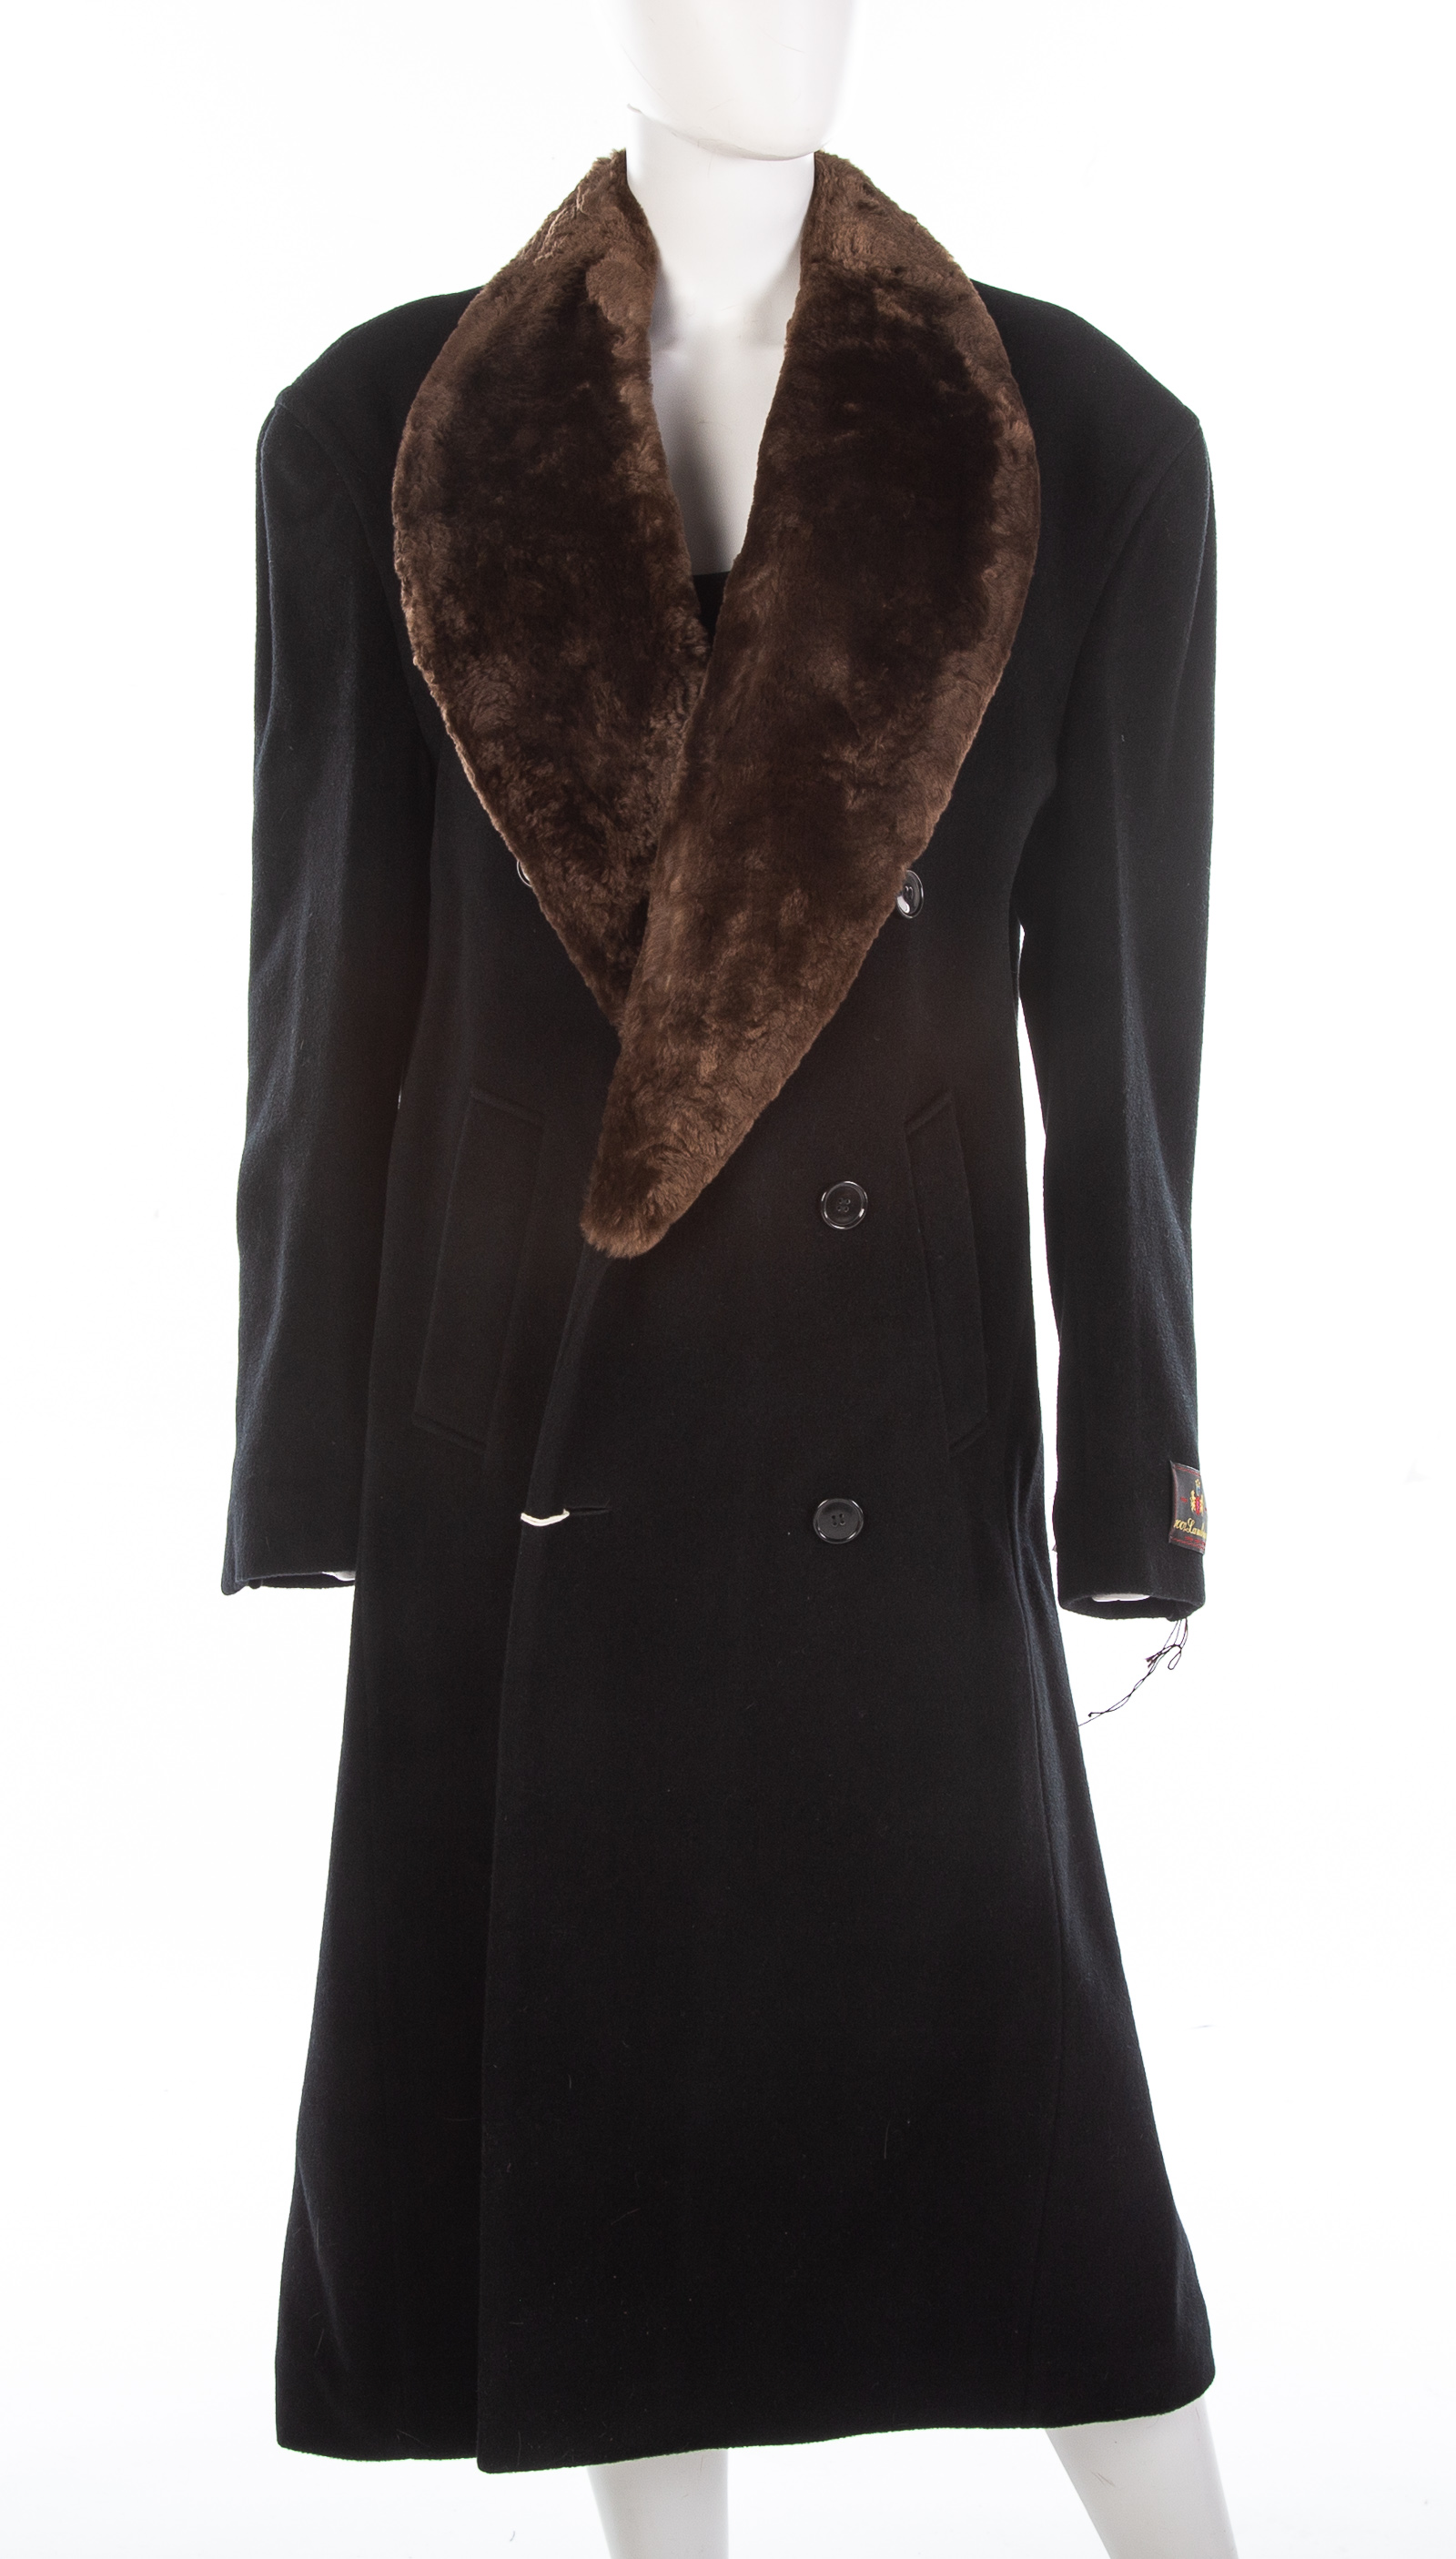 MEN'S BLACK WOOL AND FAUX FUR-TRIMMED